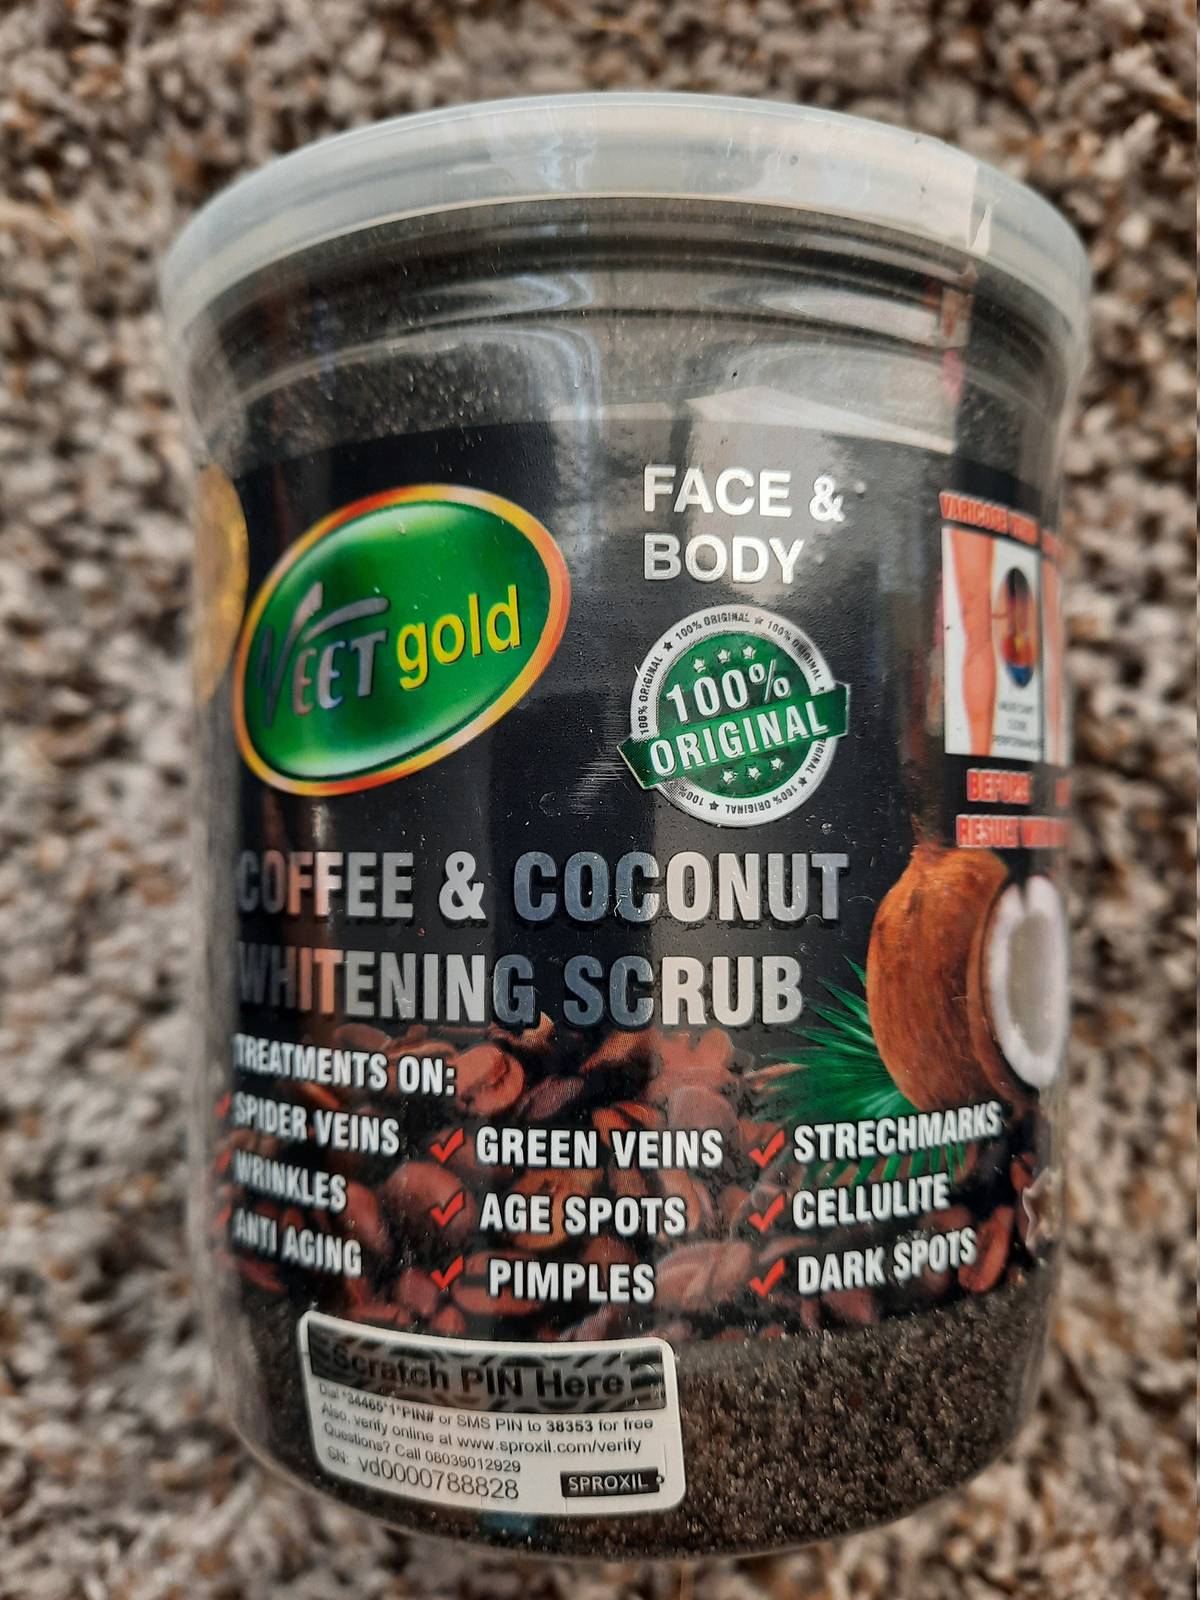 Veet gold coffee and coconut whitening scrub